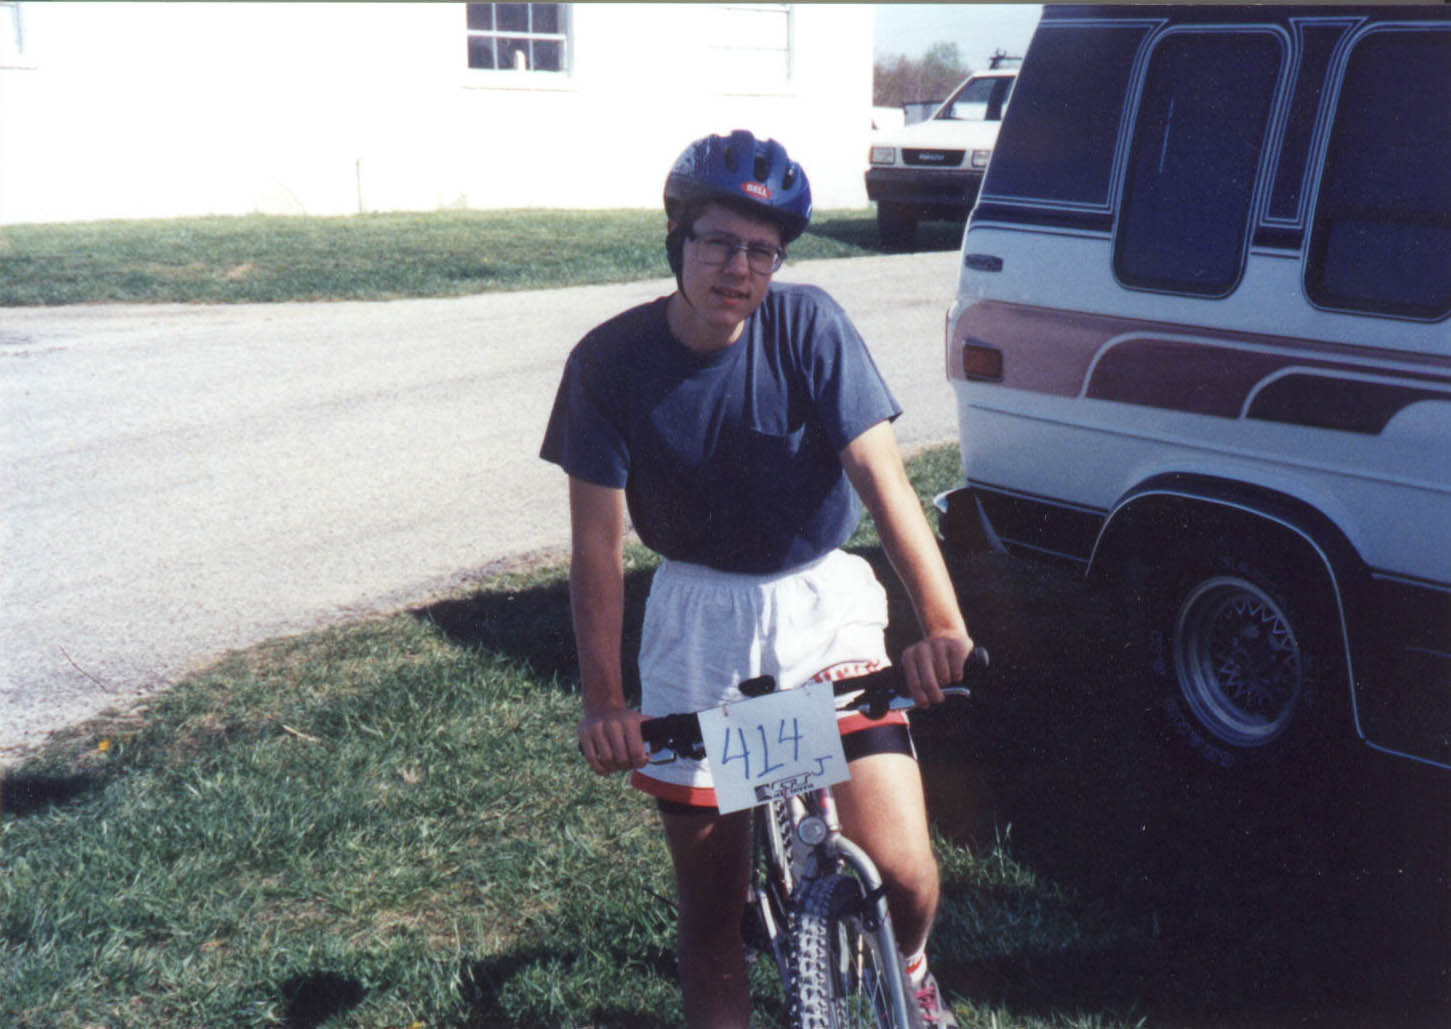 1993 - Before my first mountain bike race - the 1993 Cumberland Classic at Sewanee, TN. 6th in the juniors and 25th in the beginners (there were 100 people in the race!). The bike pictured is a rigid fork mongoose alta with reflectors still on the wheels.